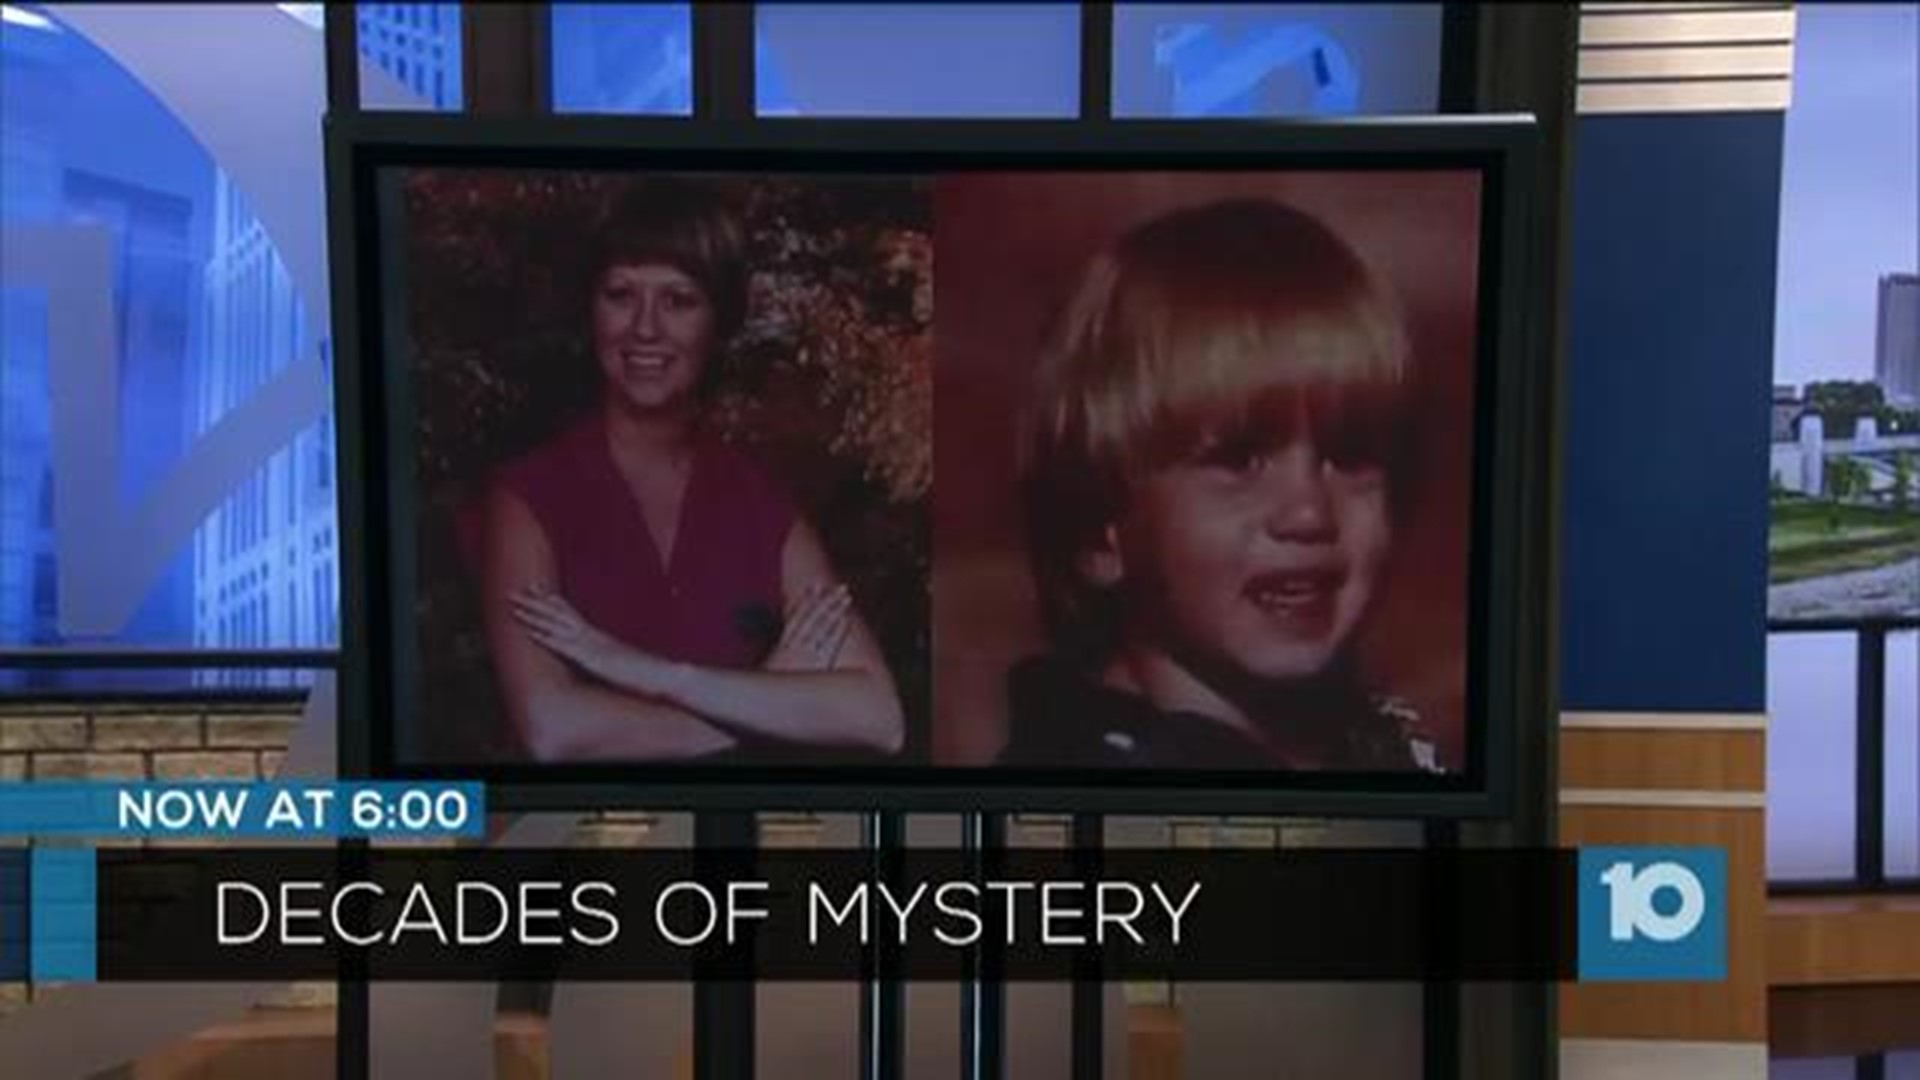 DNA testing gives new hope nearly 40 years after death of woman, nephew